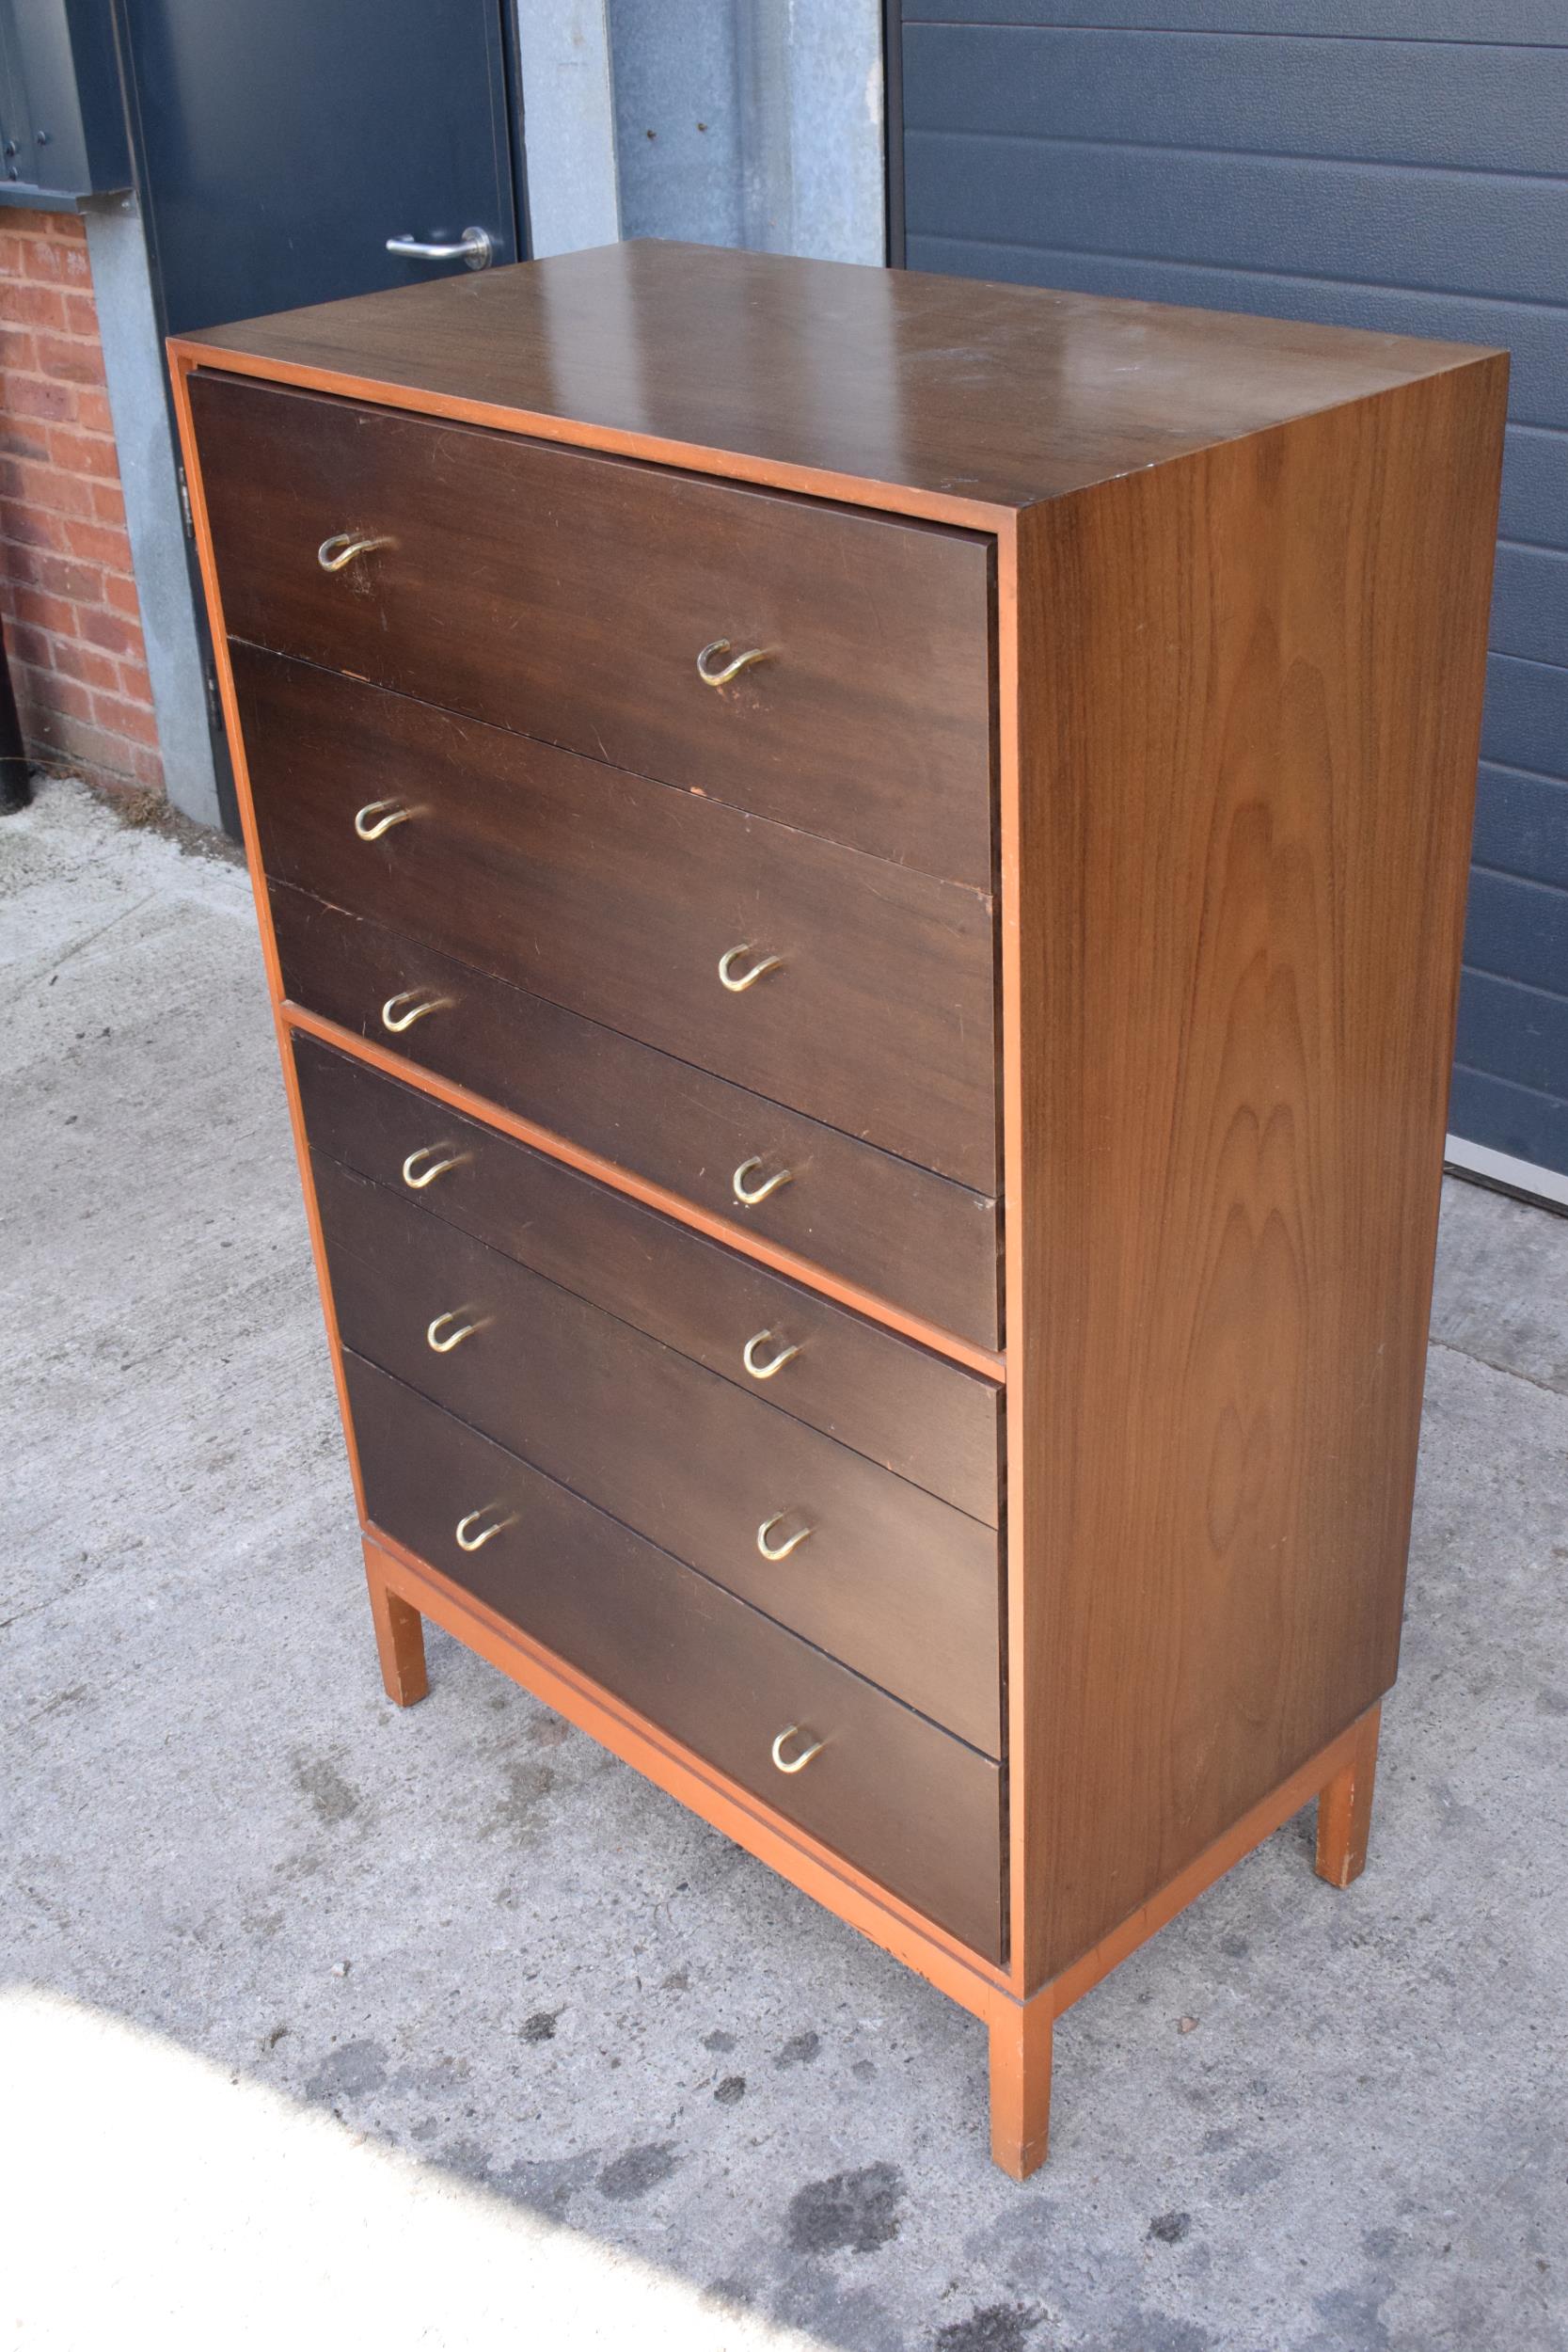 Stag mid century furniture chest of drawers / tall boy. 76 x 46 x 120cm tall. Age-related wear and - Image 2 of 9